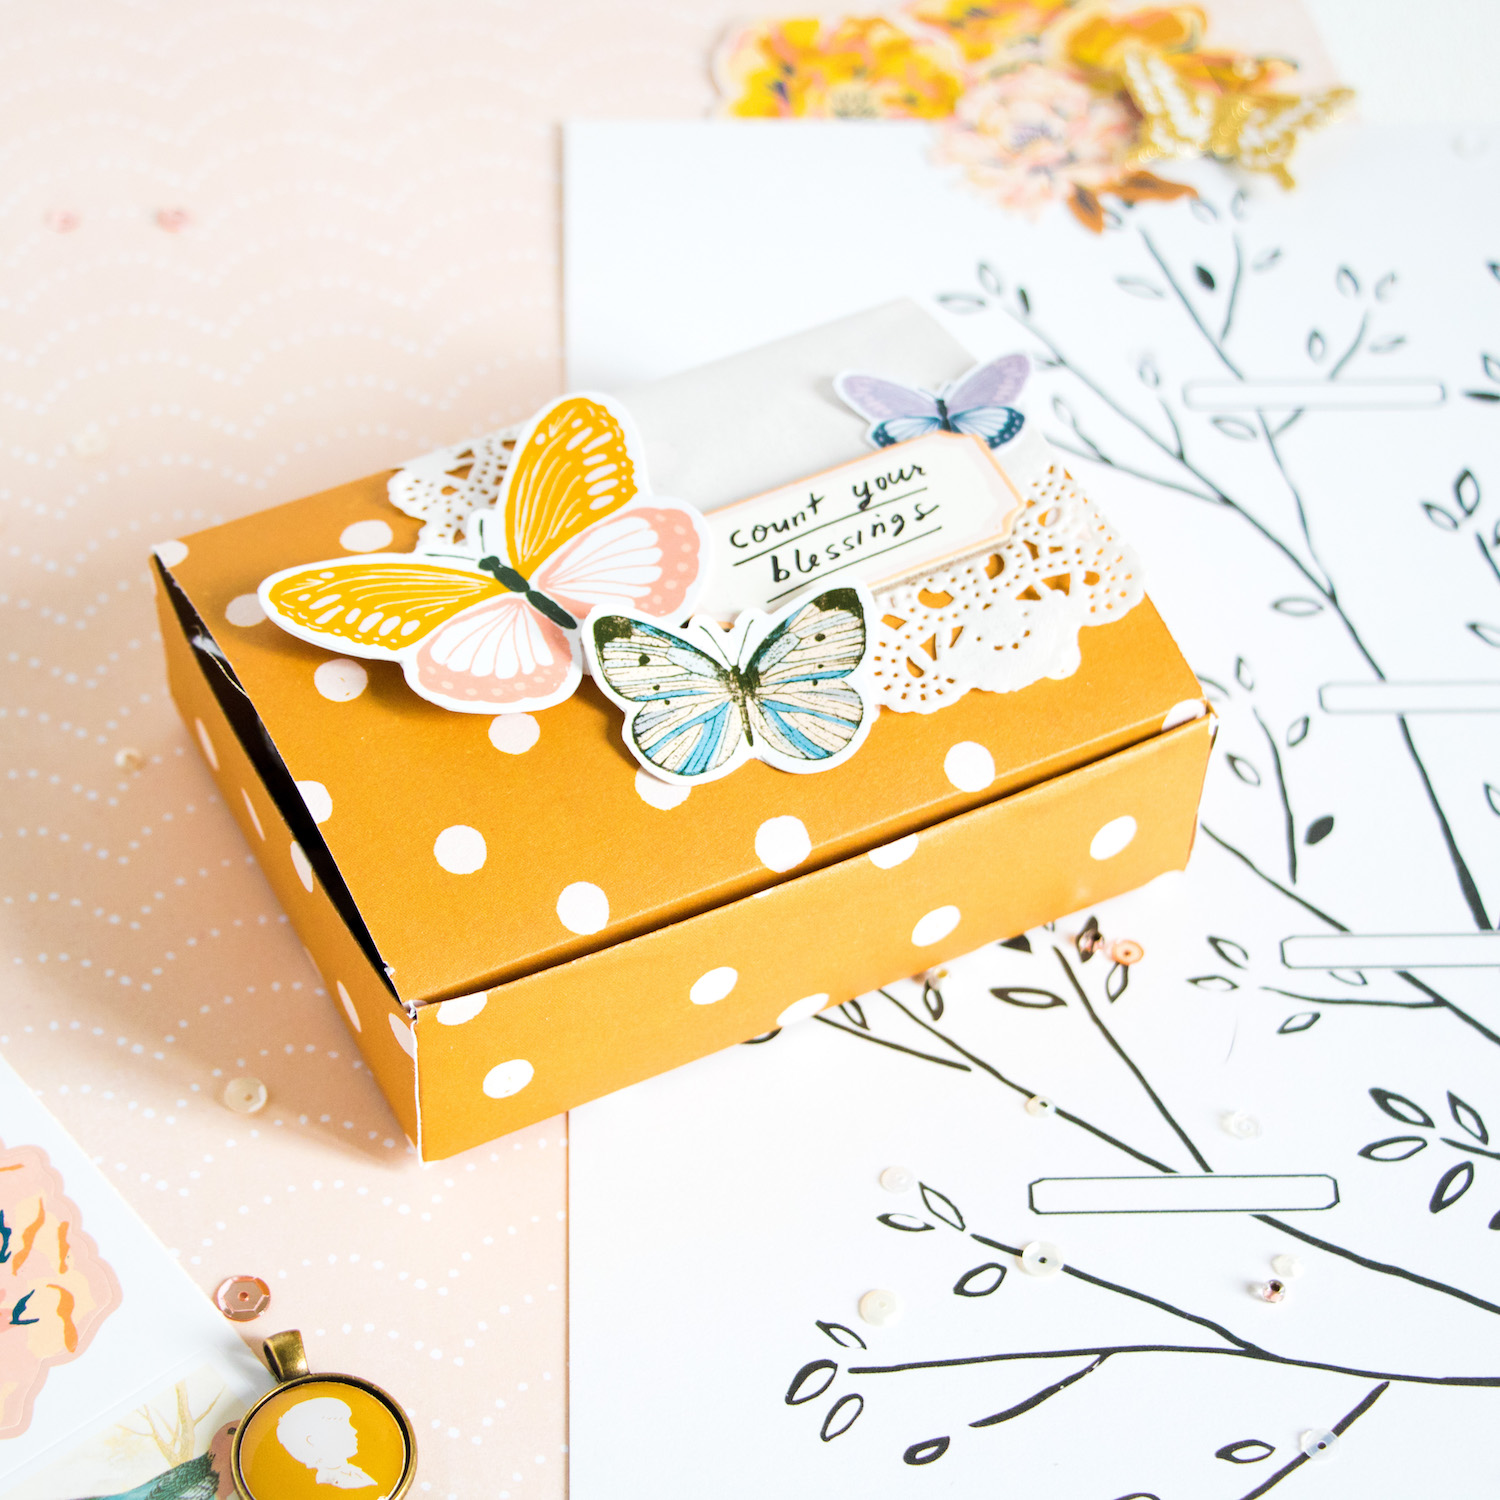 Mini Album in a Box by ScatteredConfetti. // #scrapbooking #cratepaper #maggieholmes